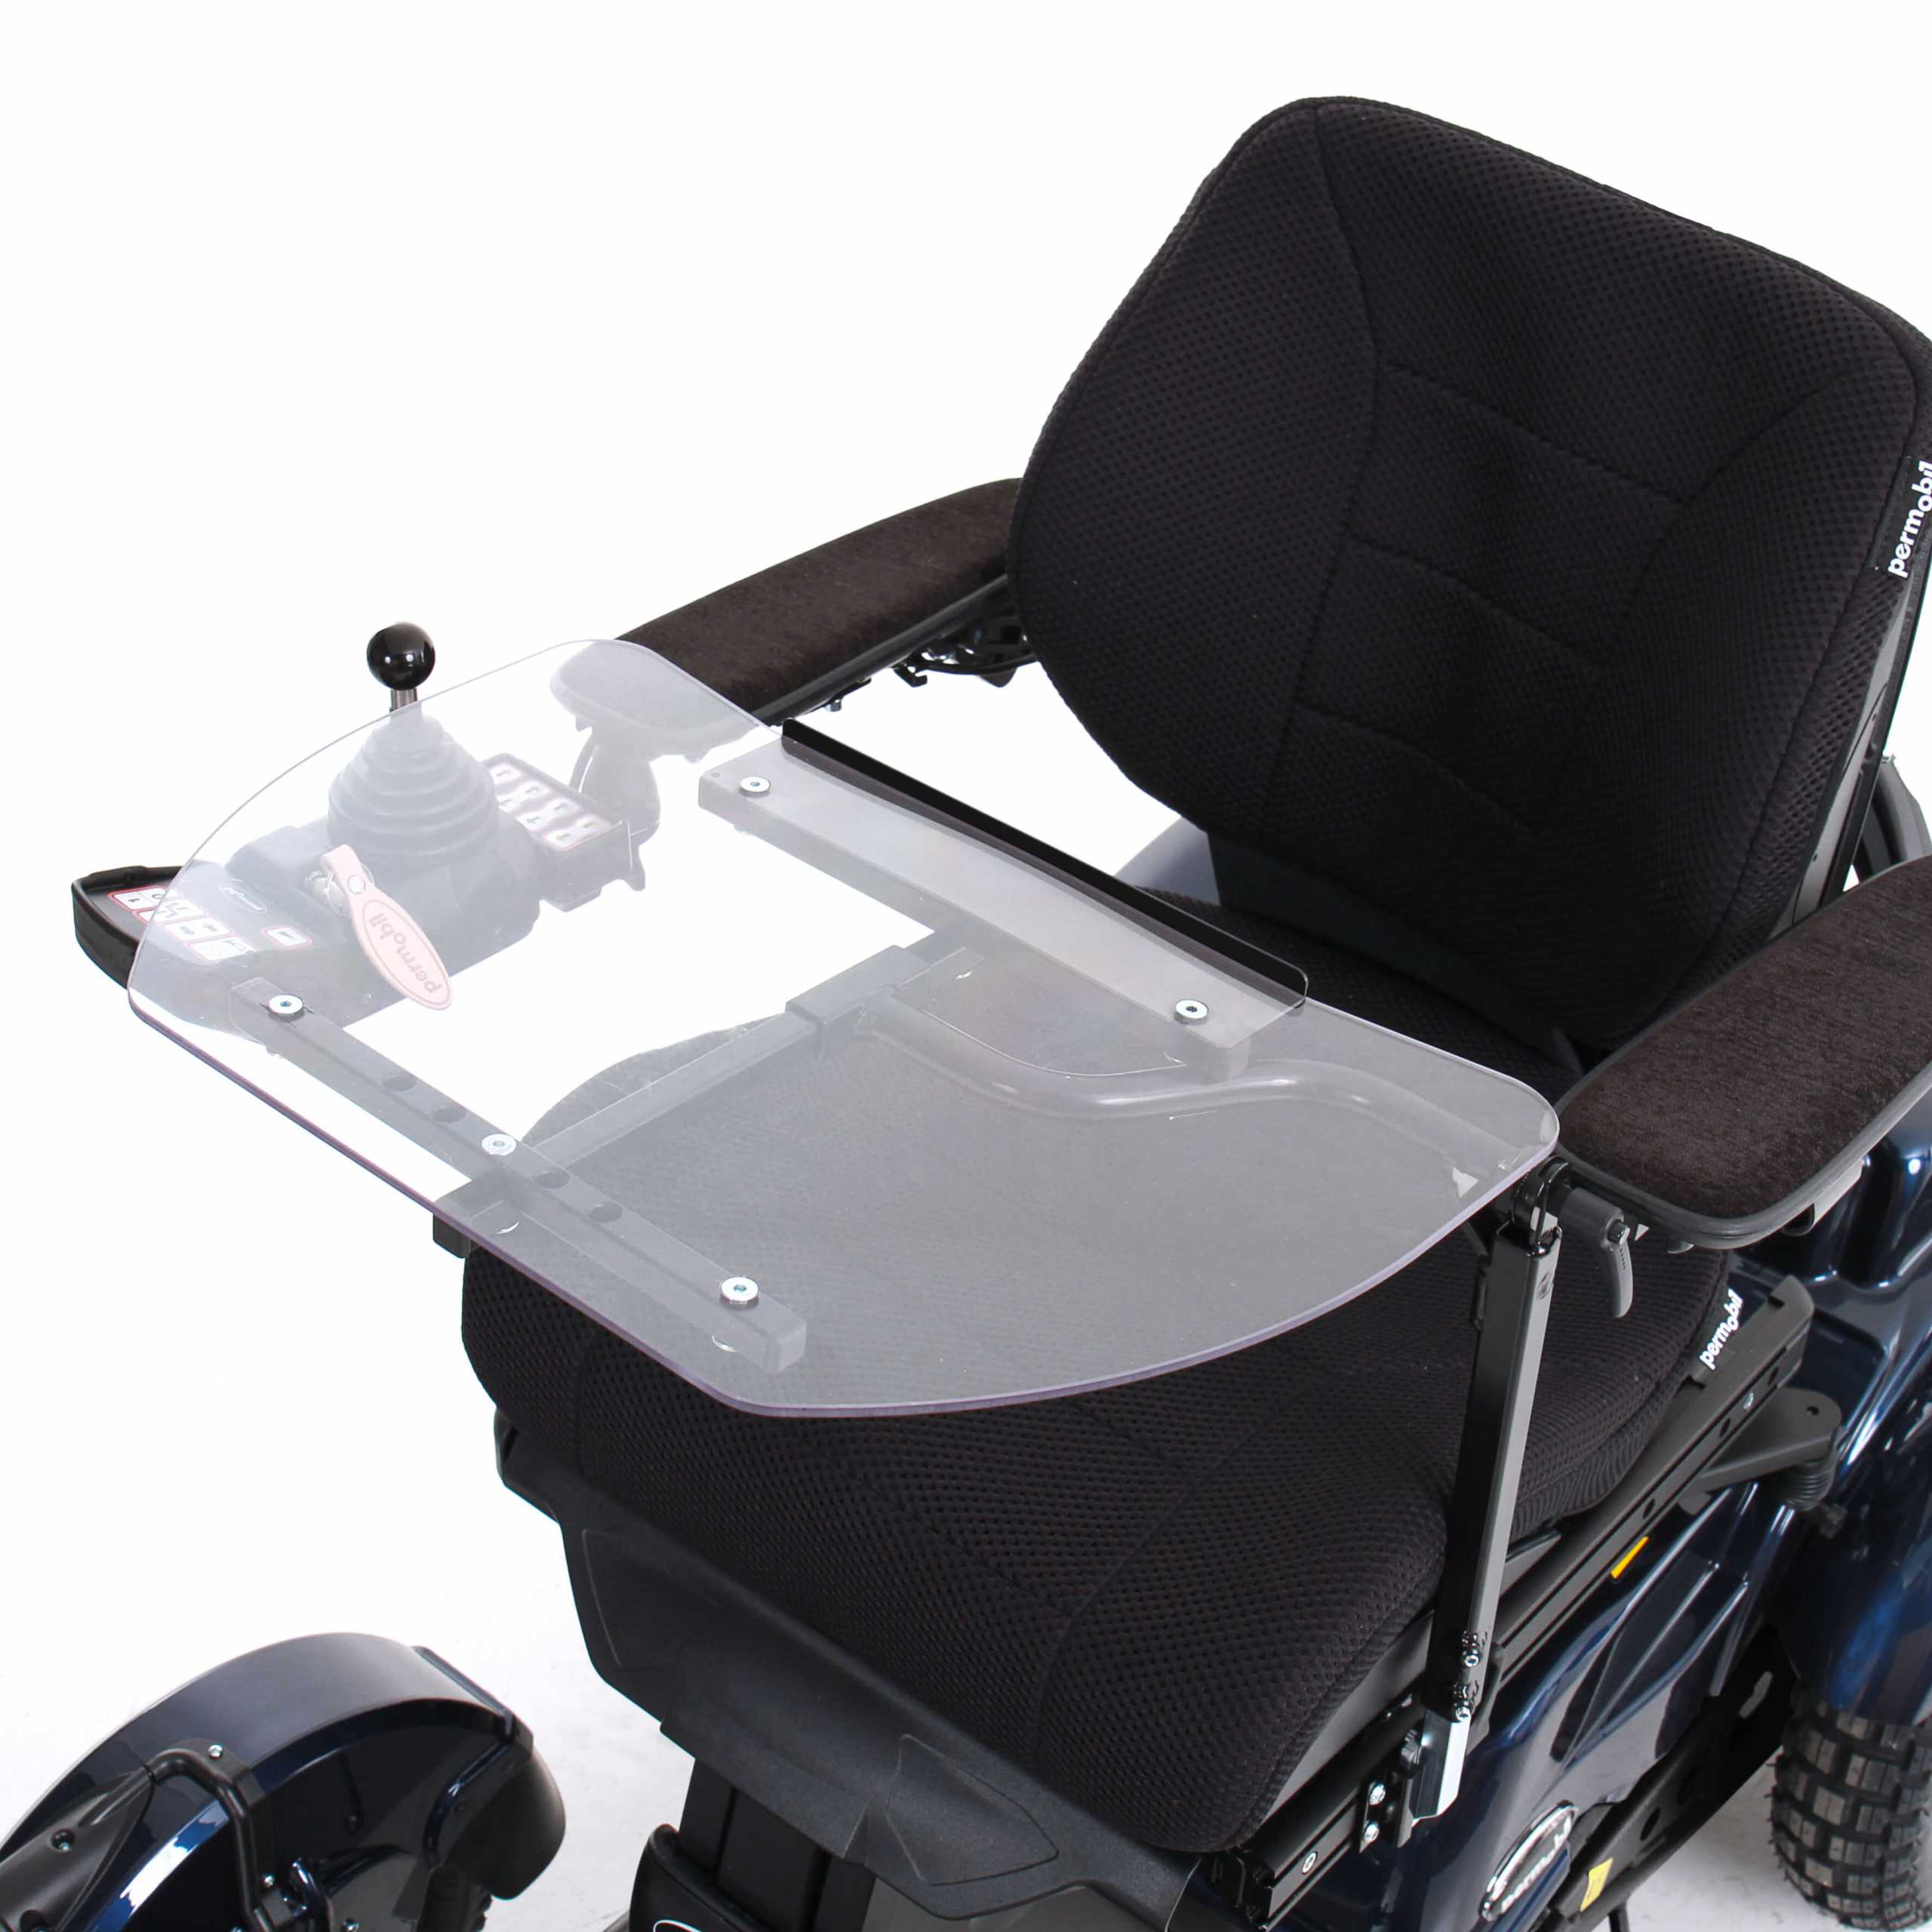 Permobil X850 Corpus 3G off road power chair